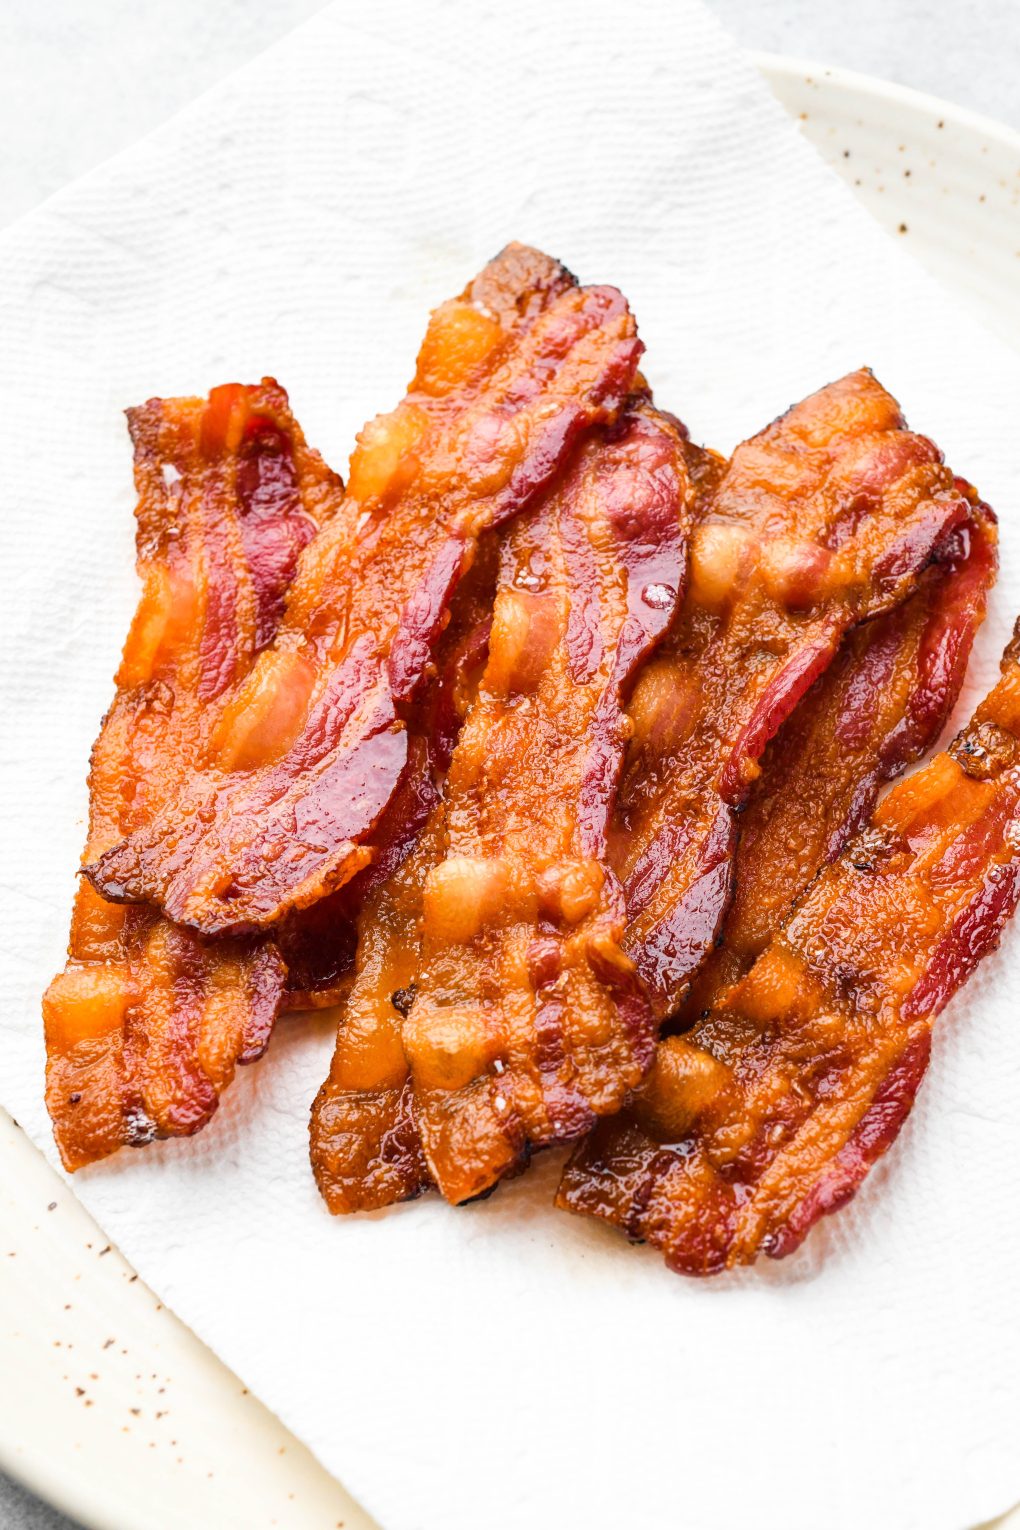 Crispy strips of bacon on paper towels, on top of a white speckled plate.